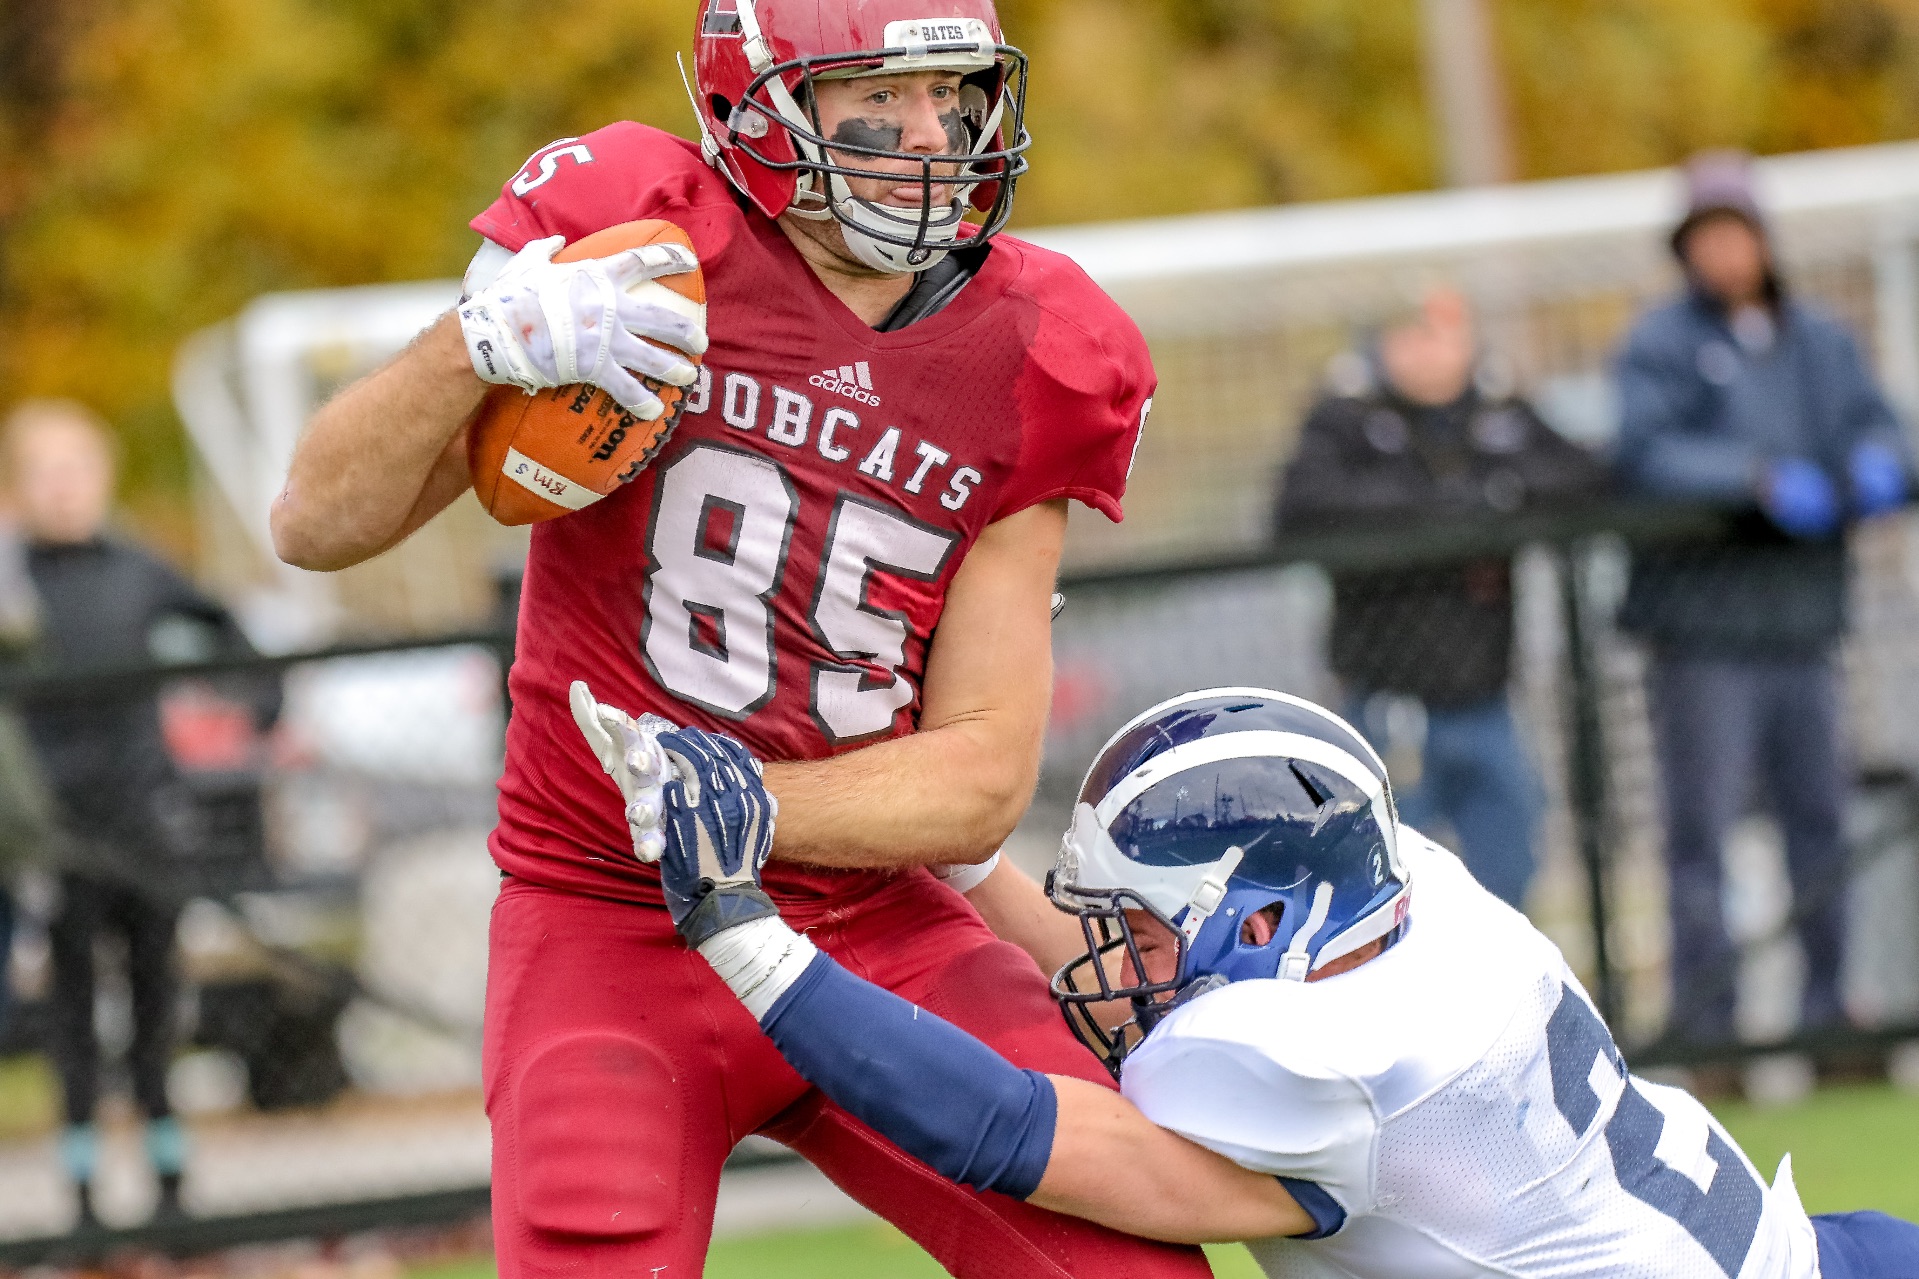 In fall 2015, Bates Football won its second outright CBB title in a row. Linebacker Mark Upton ’17 and wide receiver Mark Riley ’16 (pictured) repeated as All-NESCAC selections, while cornerback Brandon Williams ’17 received his first NESCAC All-Conference honor.